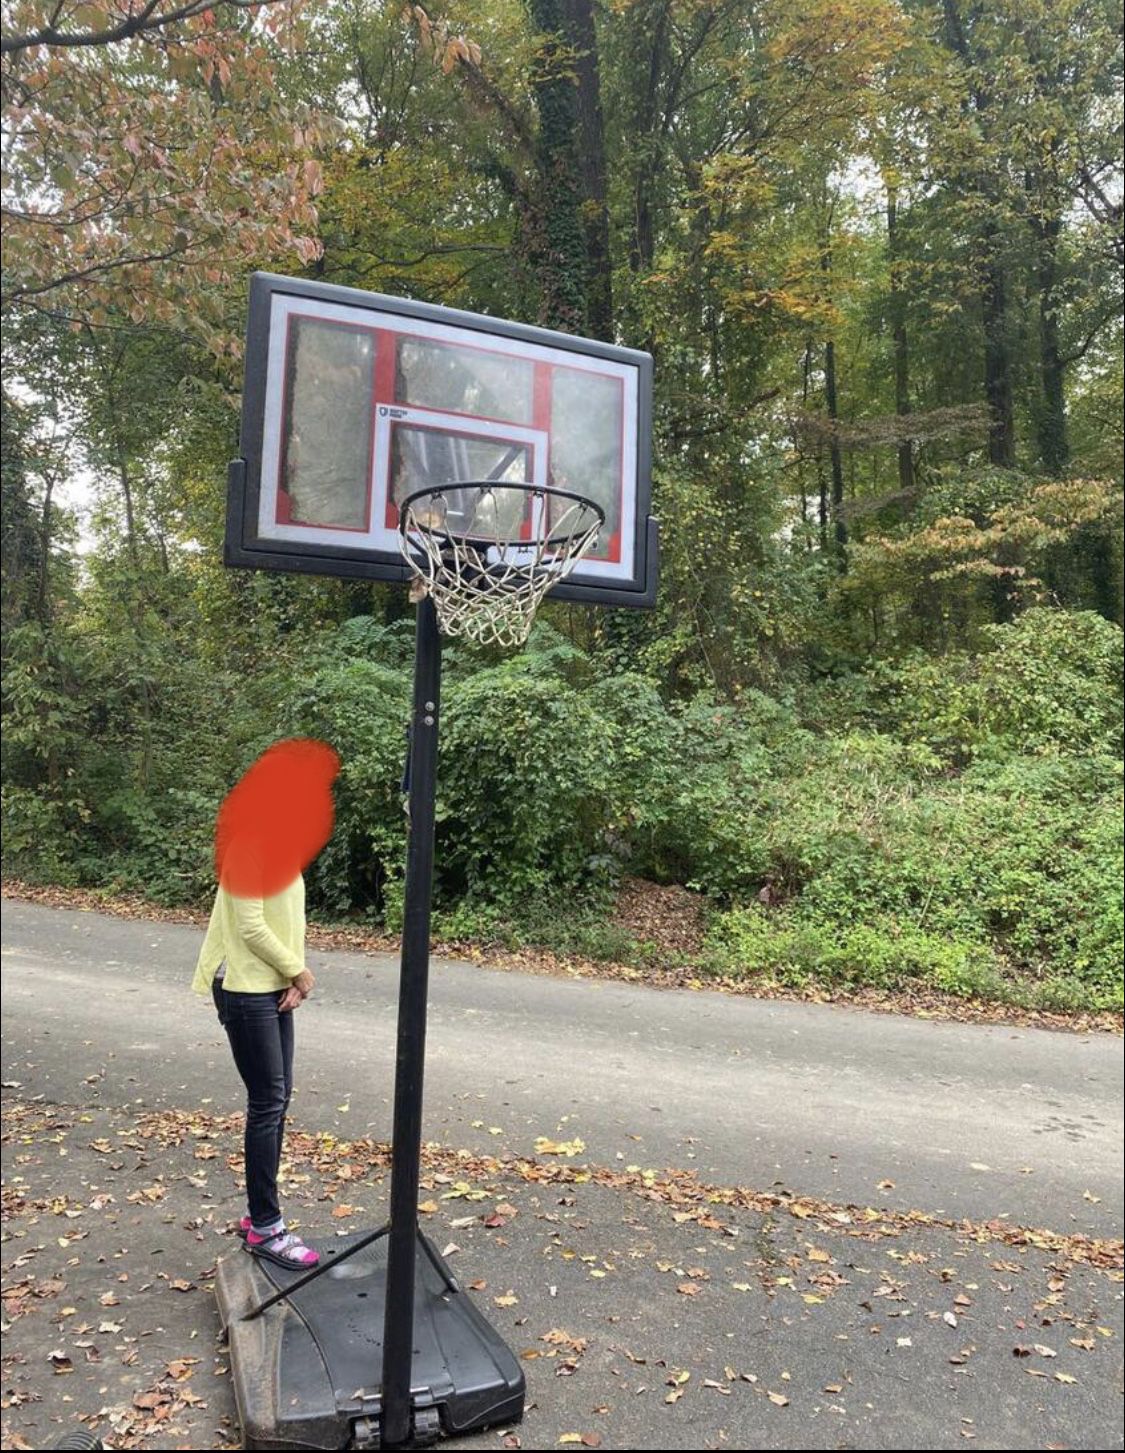 Basketball hoop in great condition